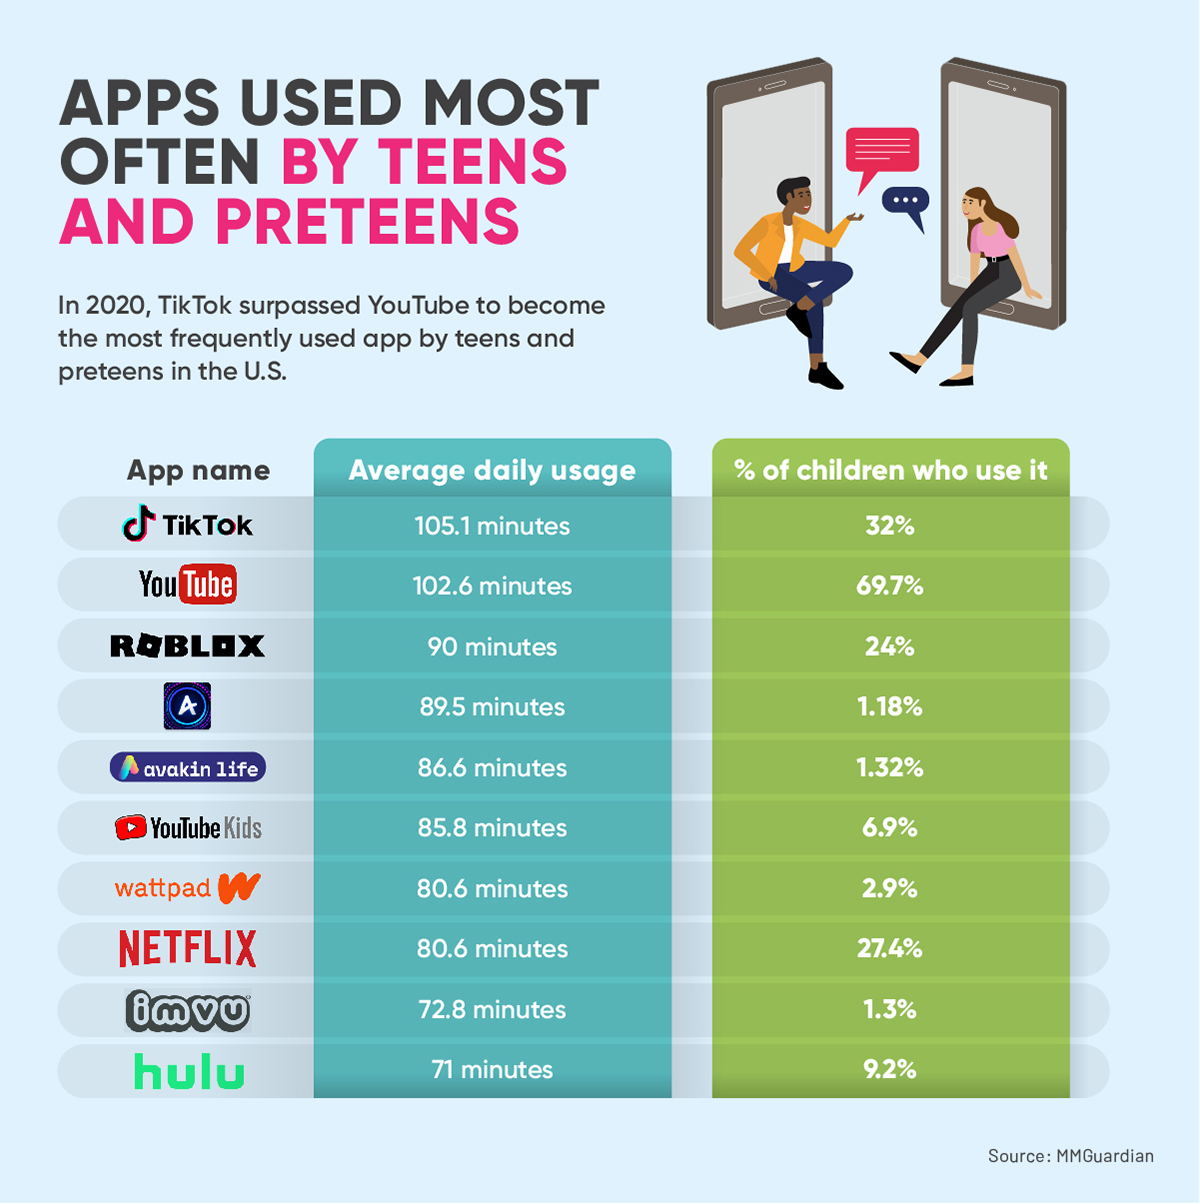 Teen and preteen usage data for the 10 most popular apps.